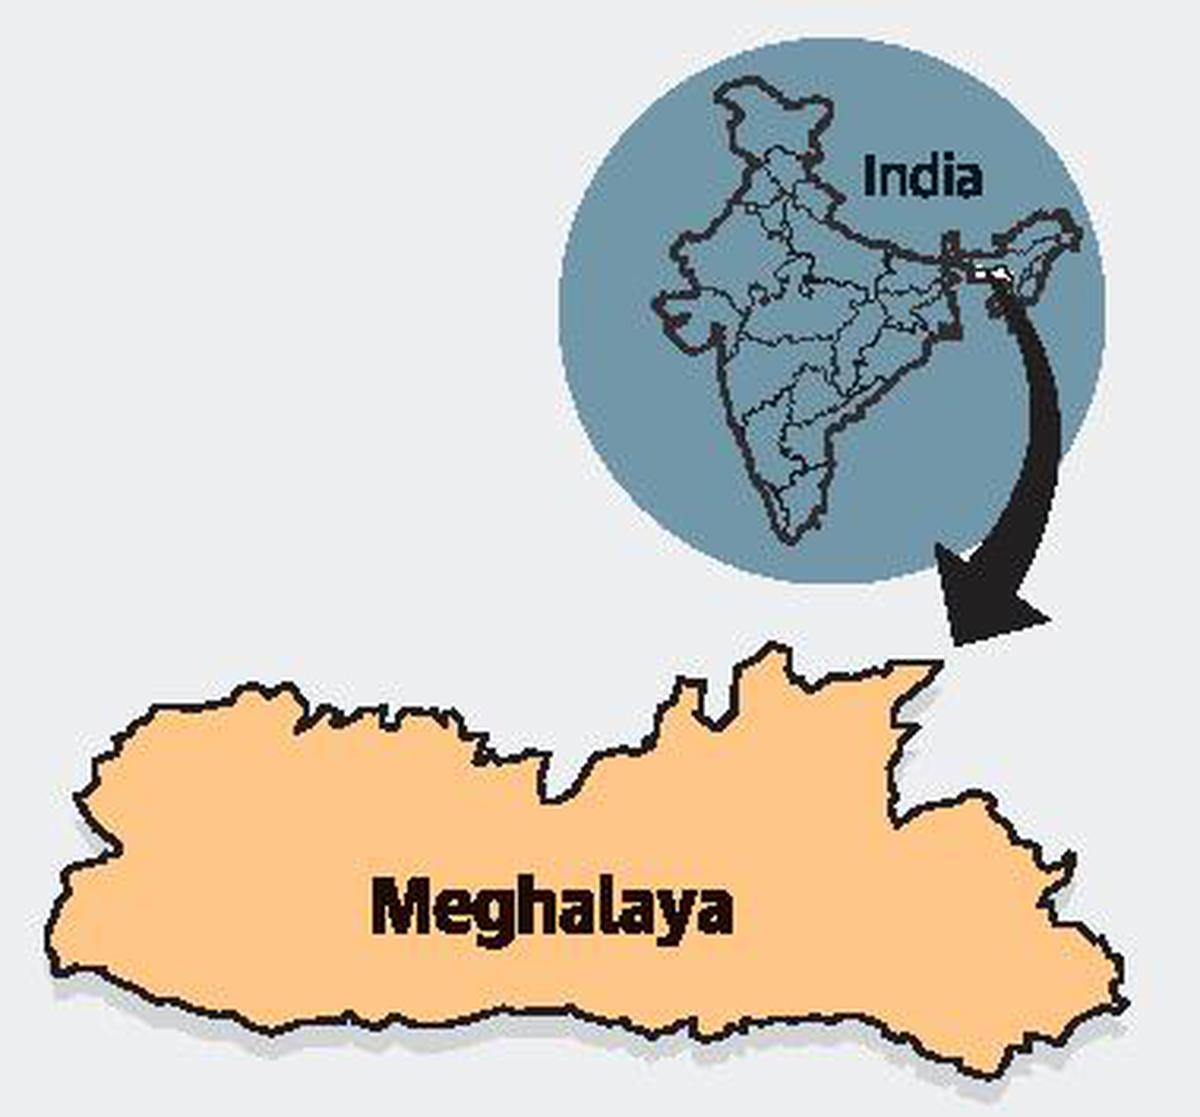 Hill State People’s Democratic Party, a BJP ally, pushes for bifurcation of Meghalaya